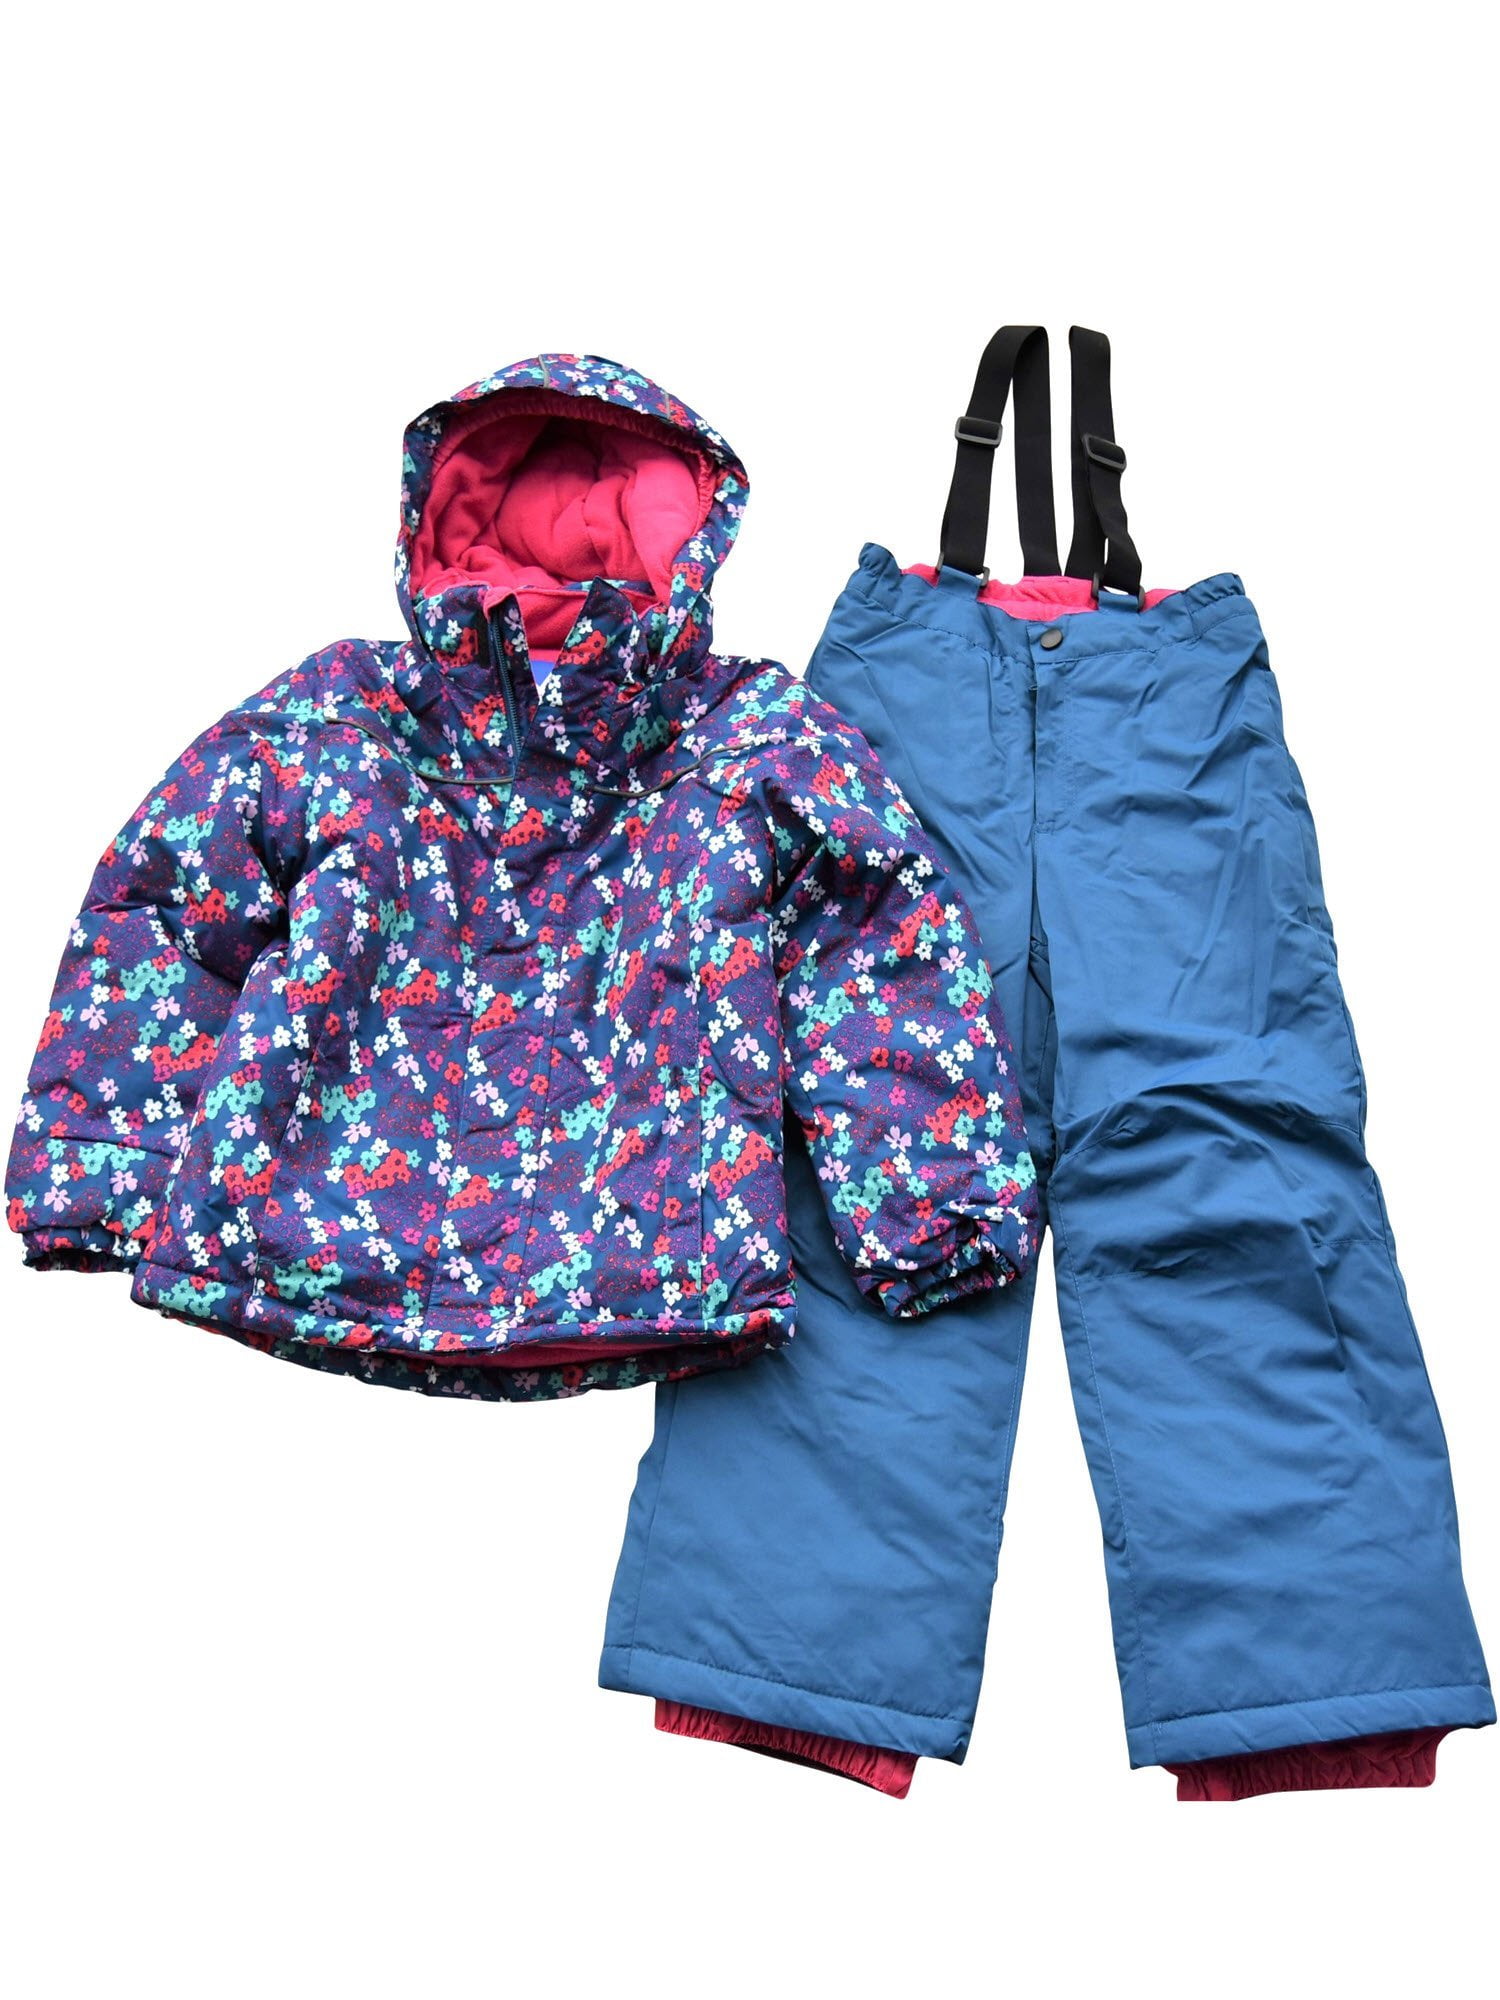 M2C Boys Girls Color Block Insulated Ski Jacket Hooded Winter Thick Coat Sports & Outdoors 